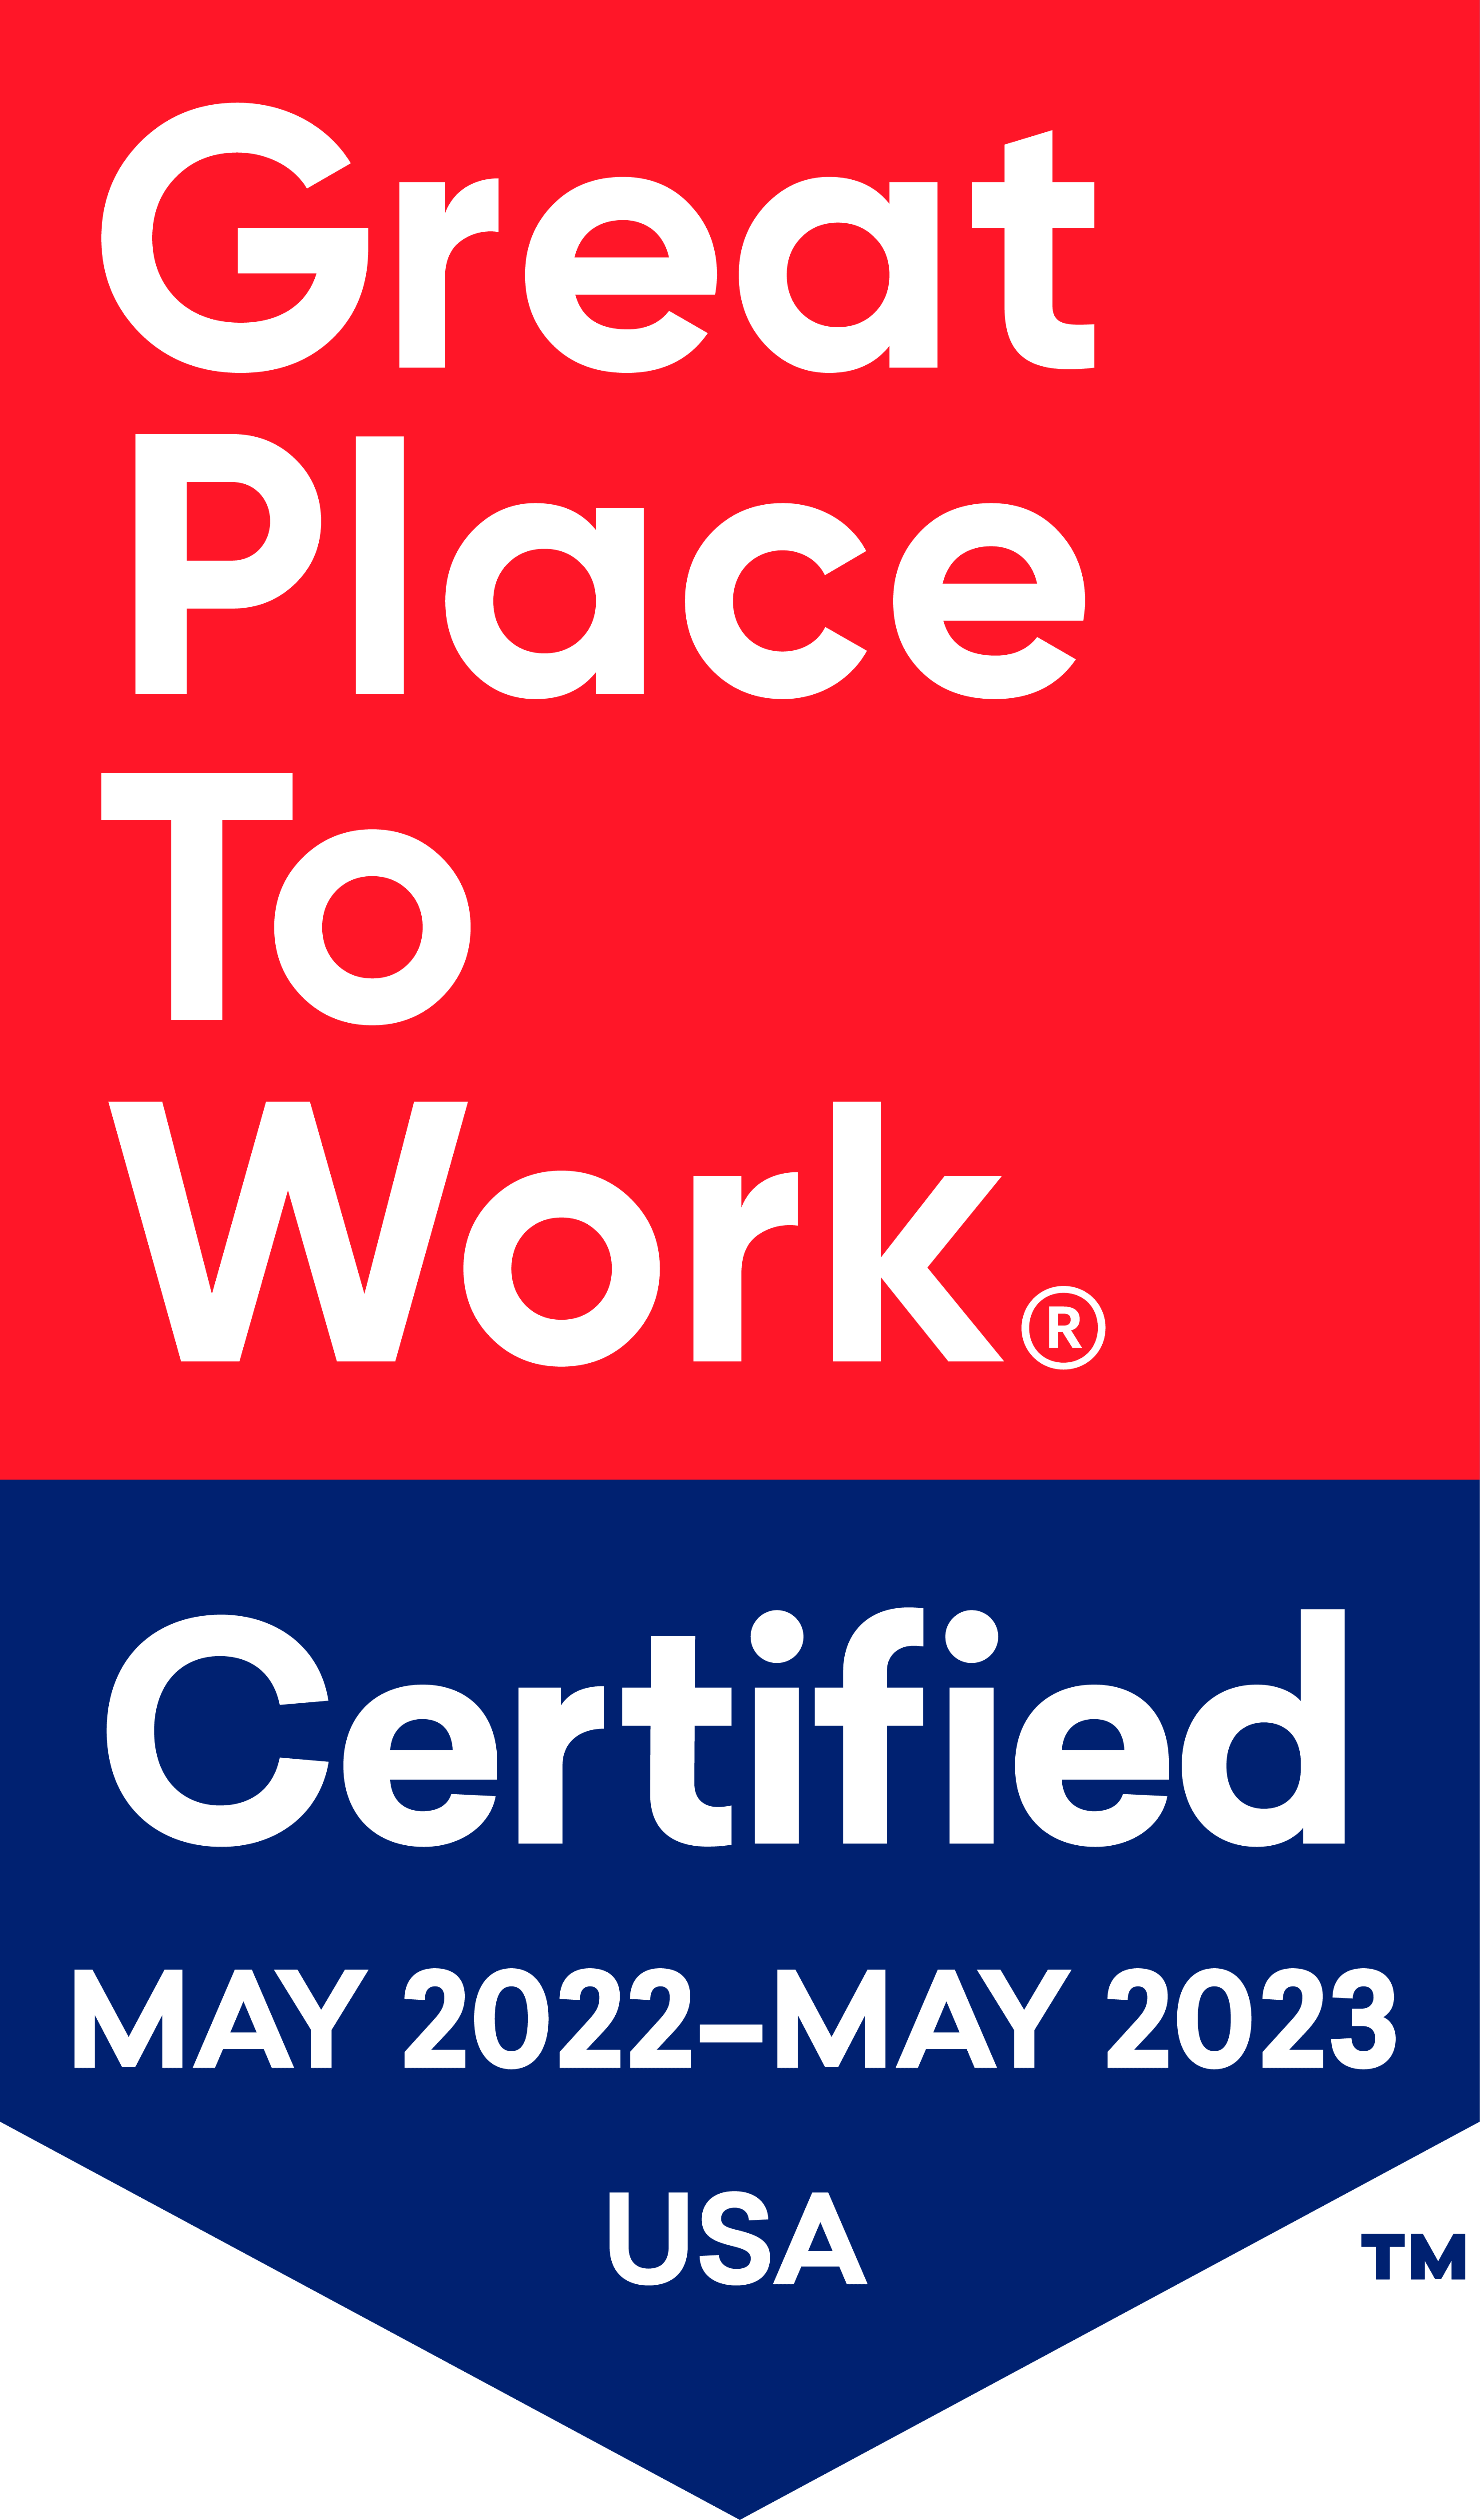 Sky Ridge is Great Place To Work Certified